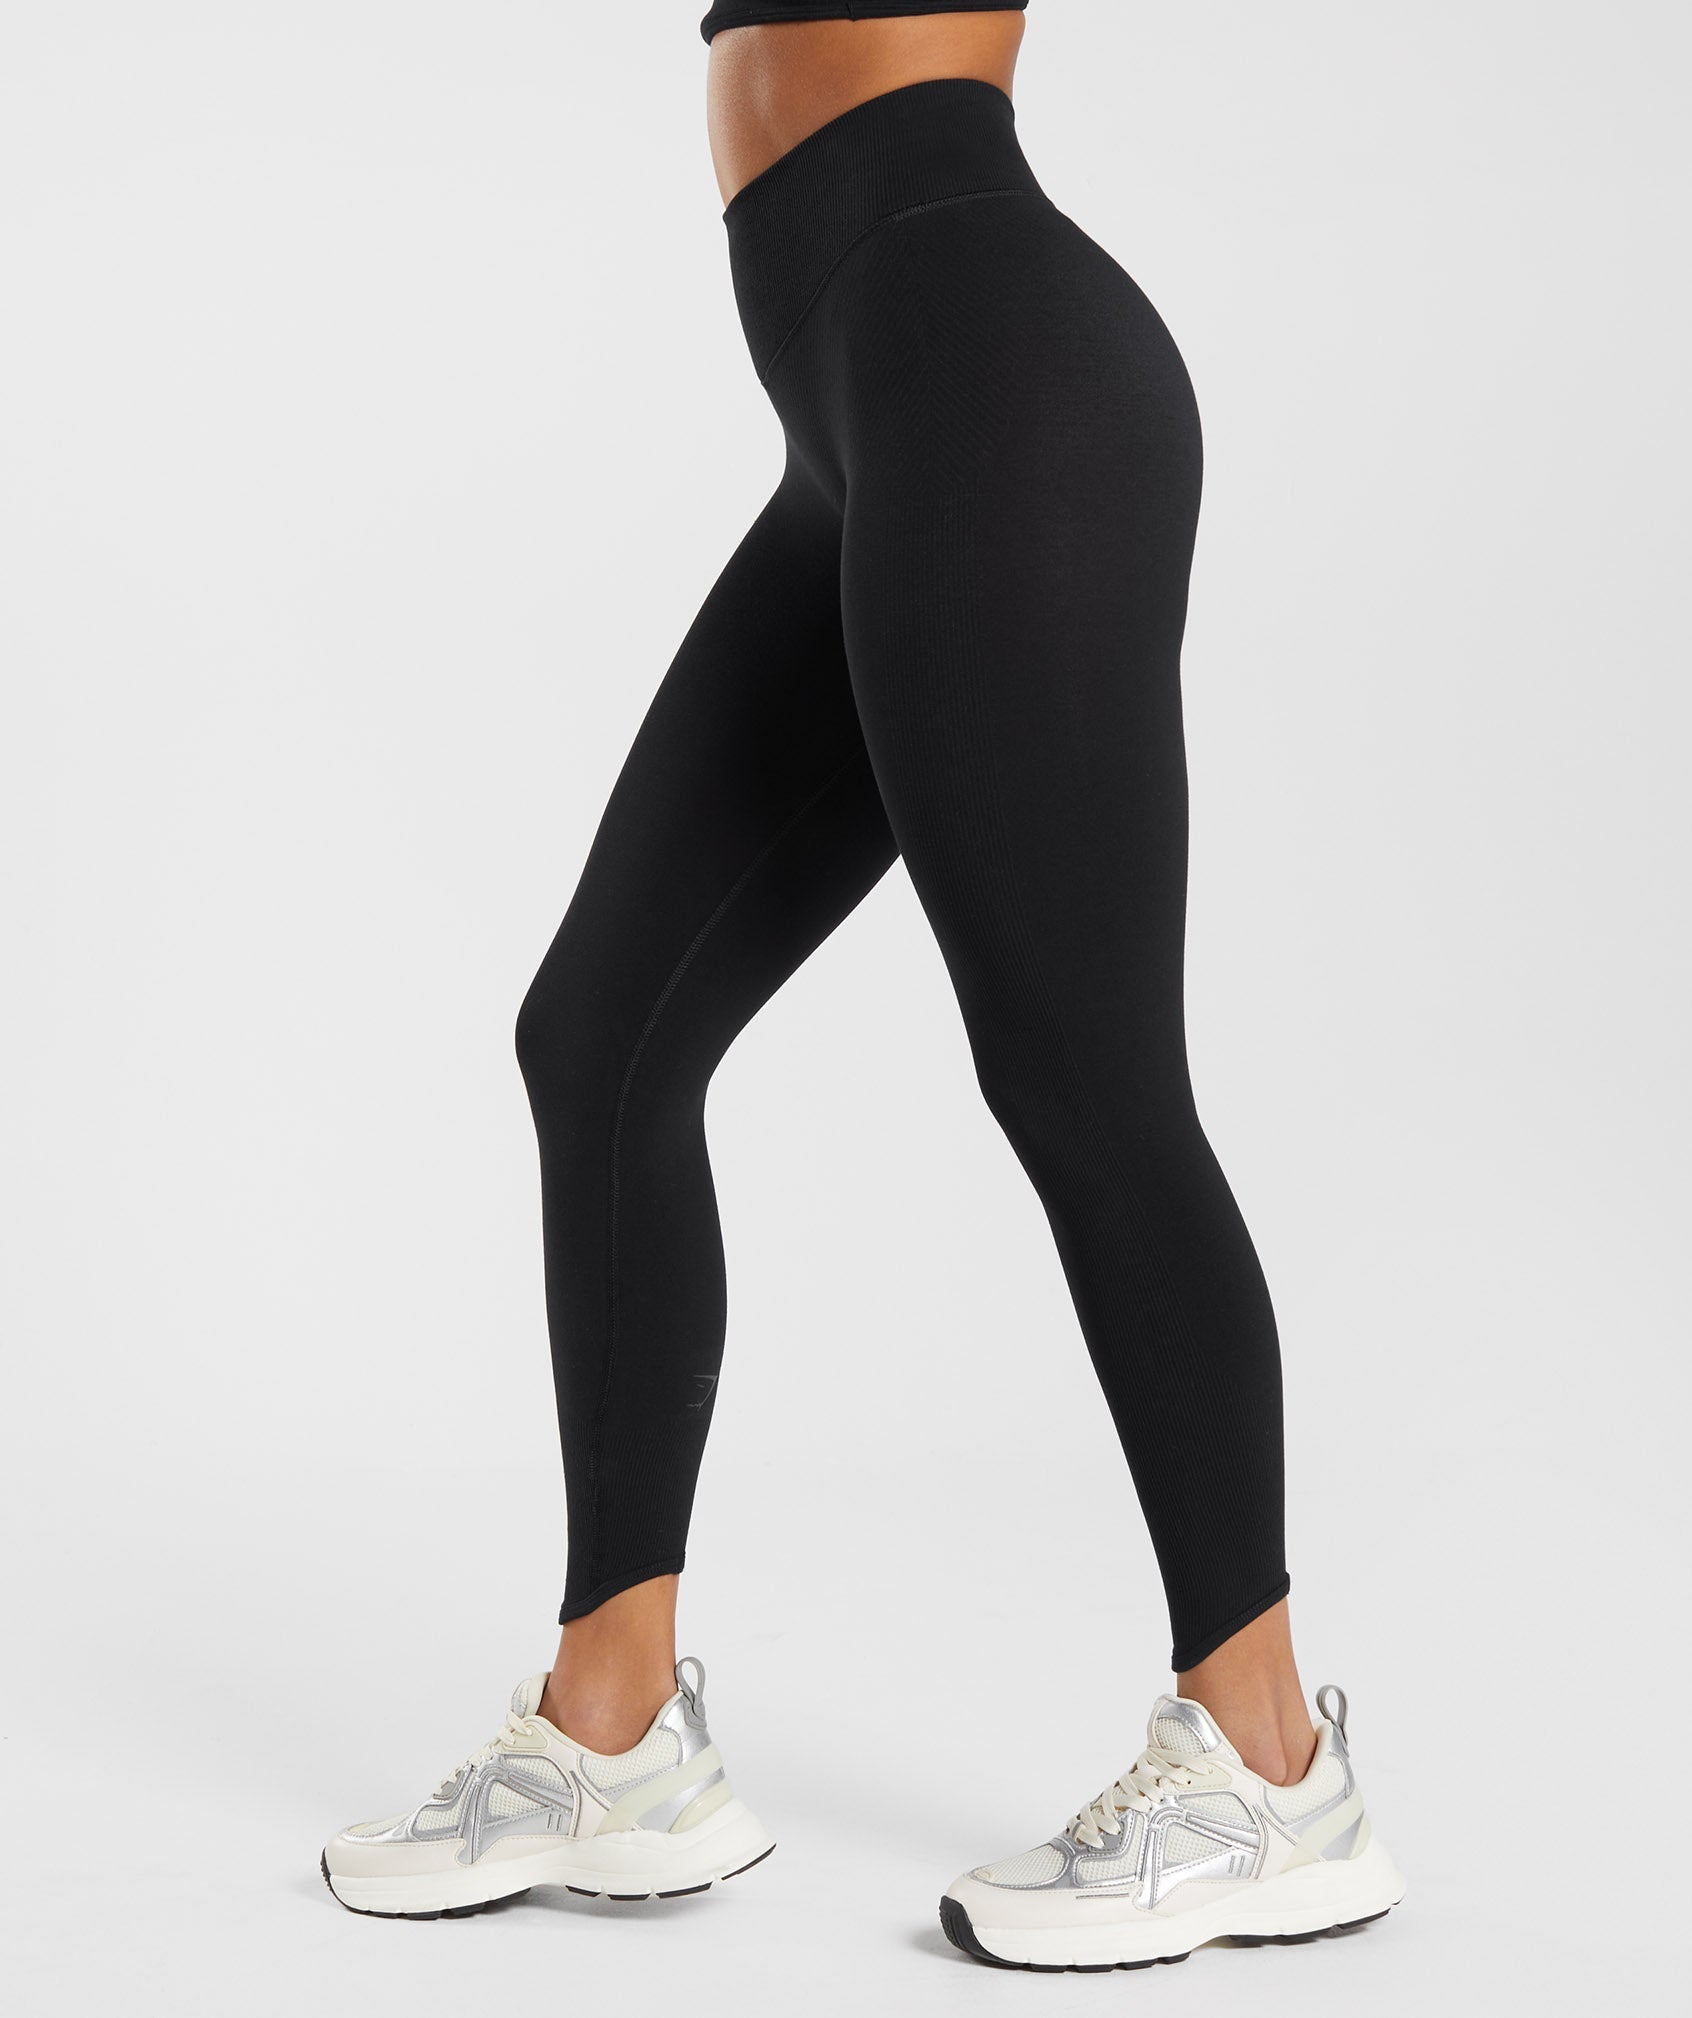 Rest Day Seamless Leggings in Black - view 3